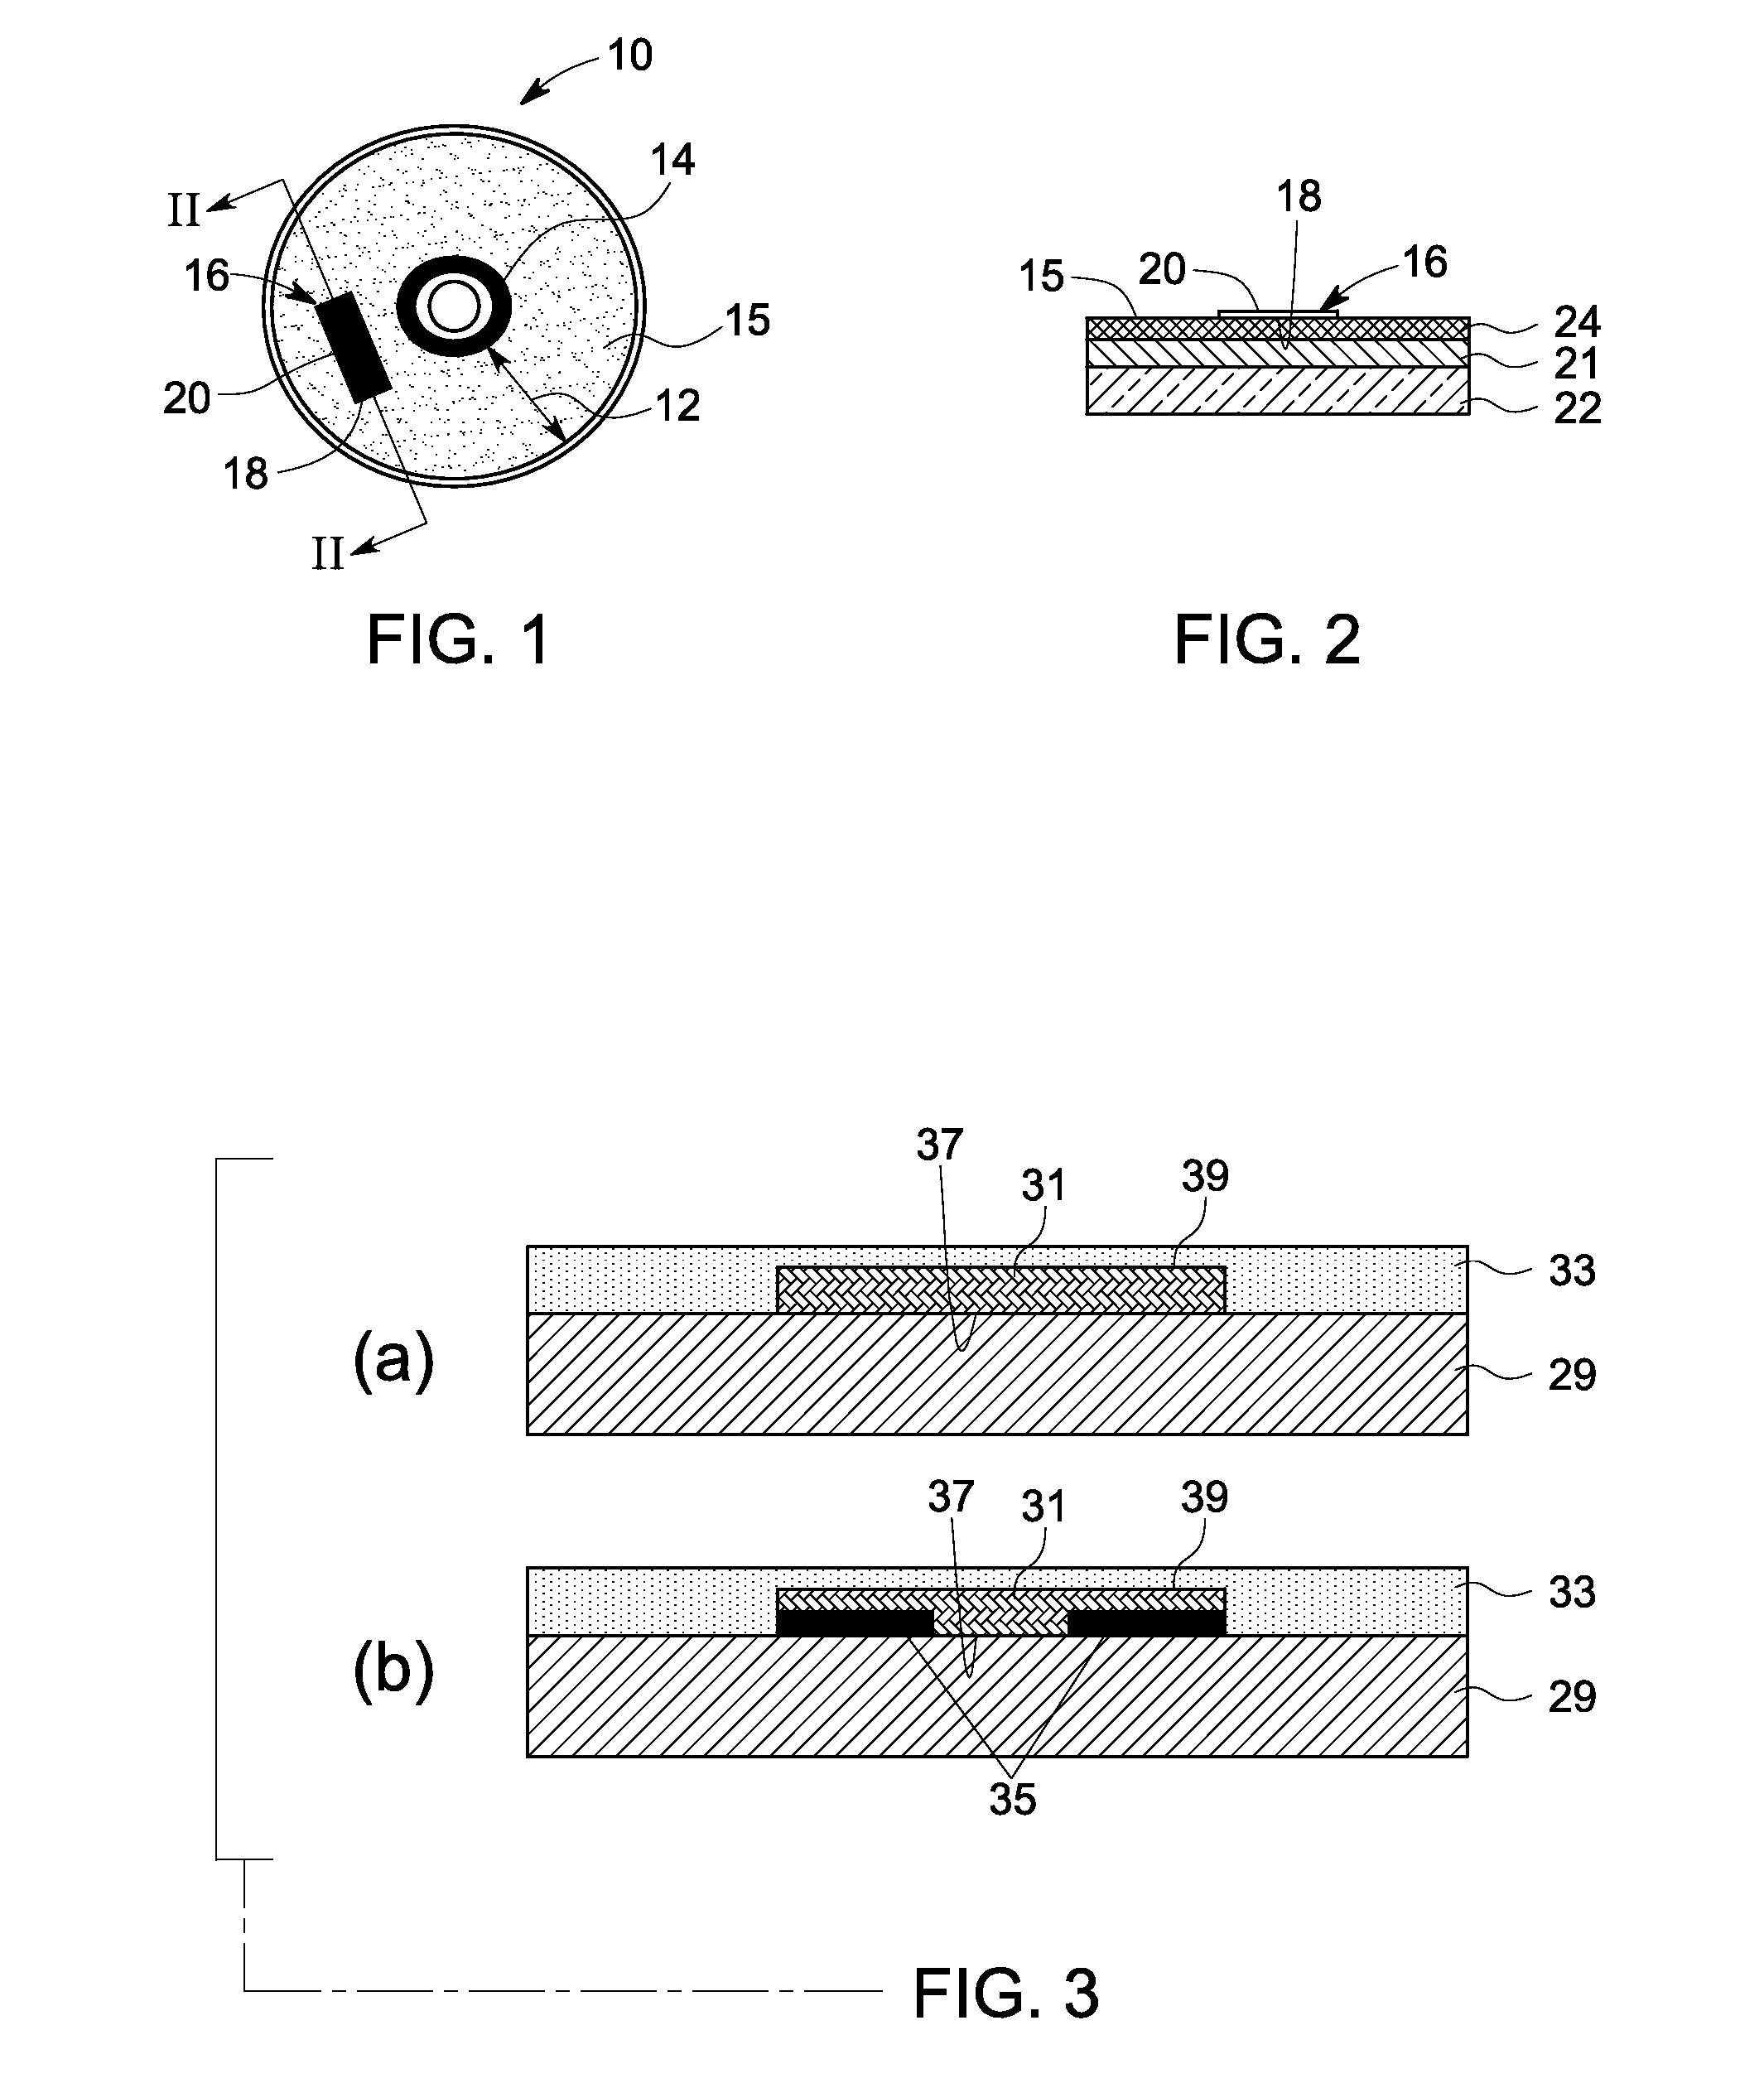 Optical article having an electrically responsive layer as an Anti-theft feature and a system and method for inhibiting theft